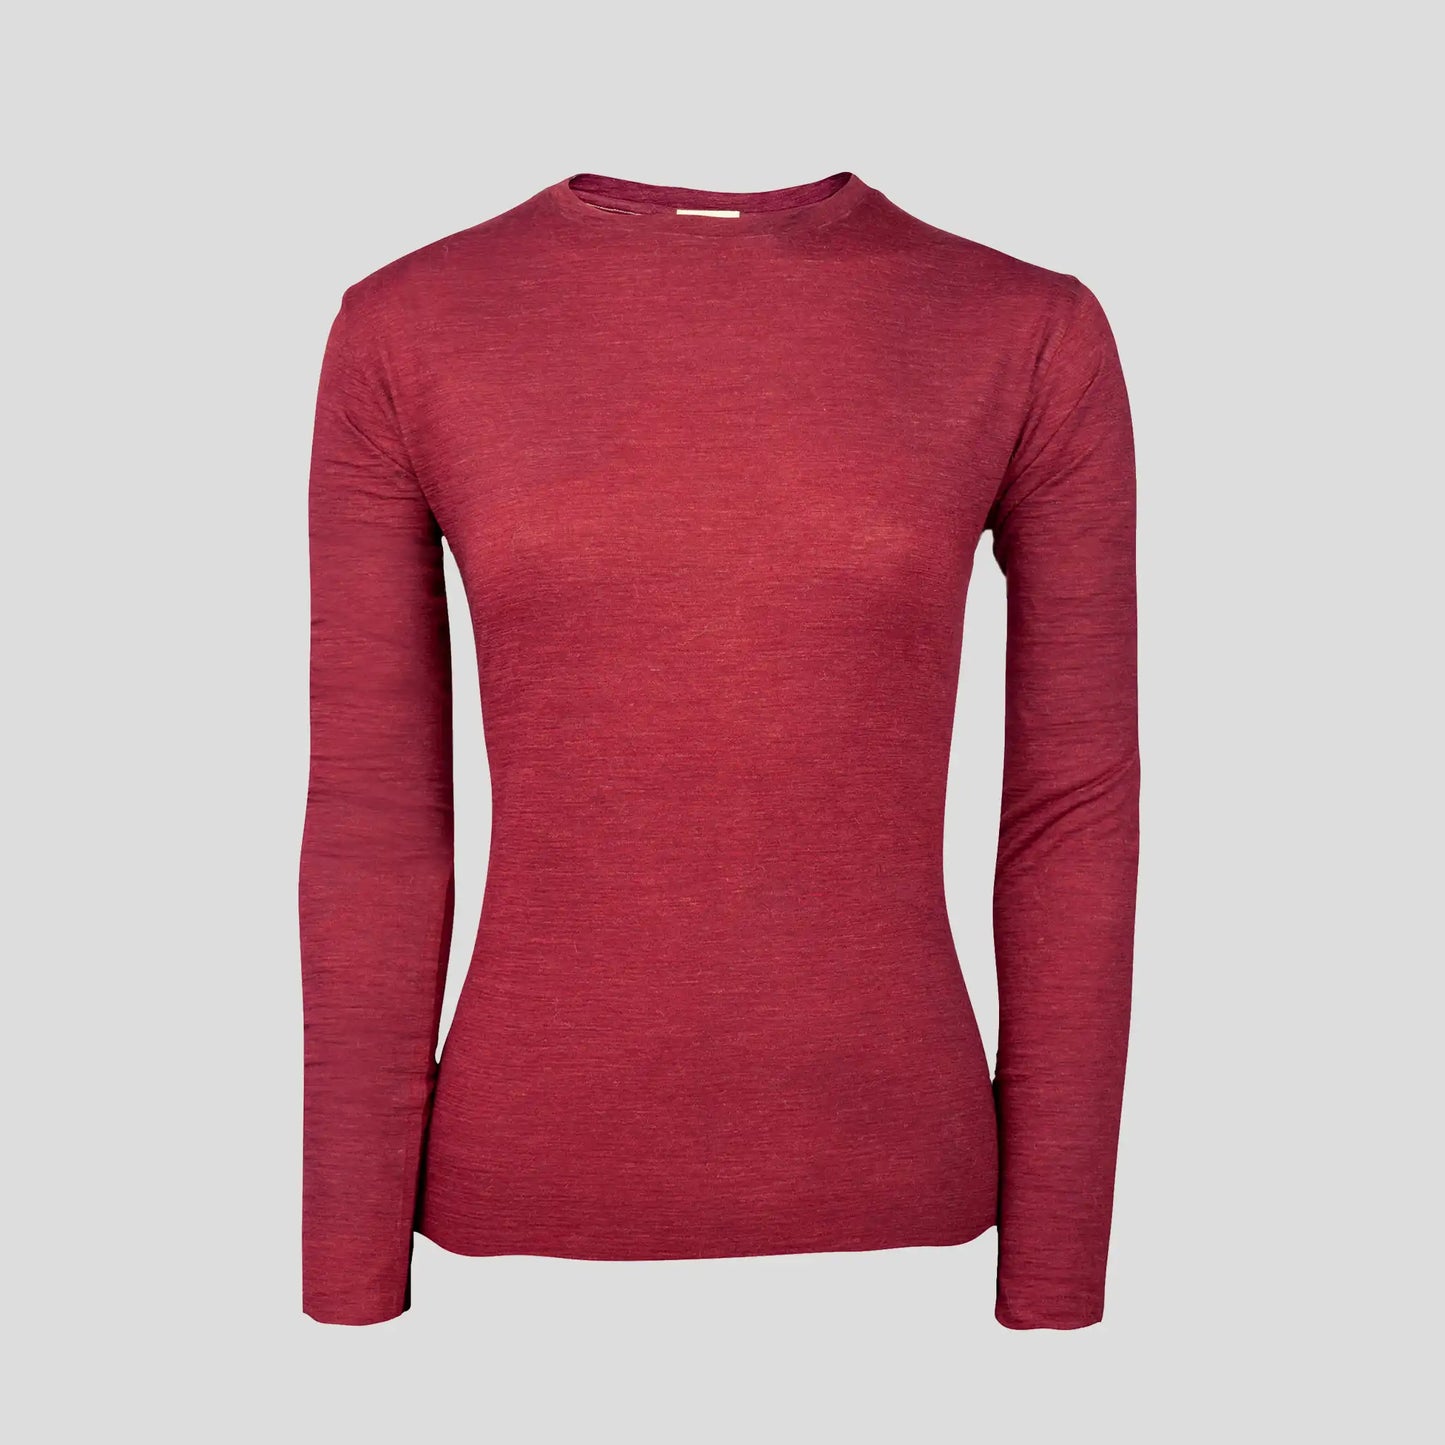 Women's Alpaca Wool Long Sleeve Base Layer: 160 Ultralight color Natural Red